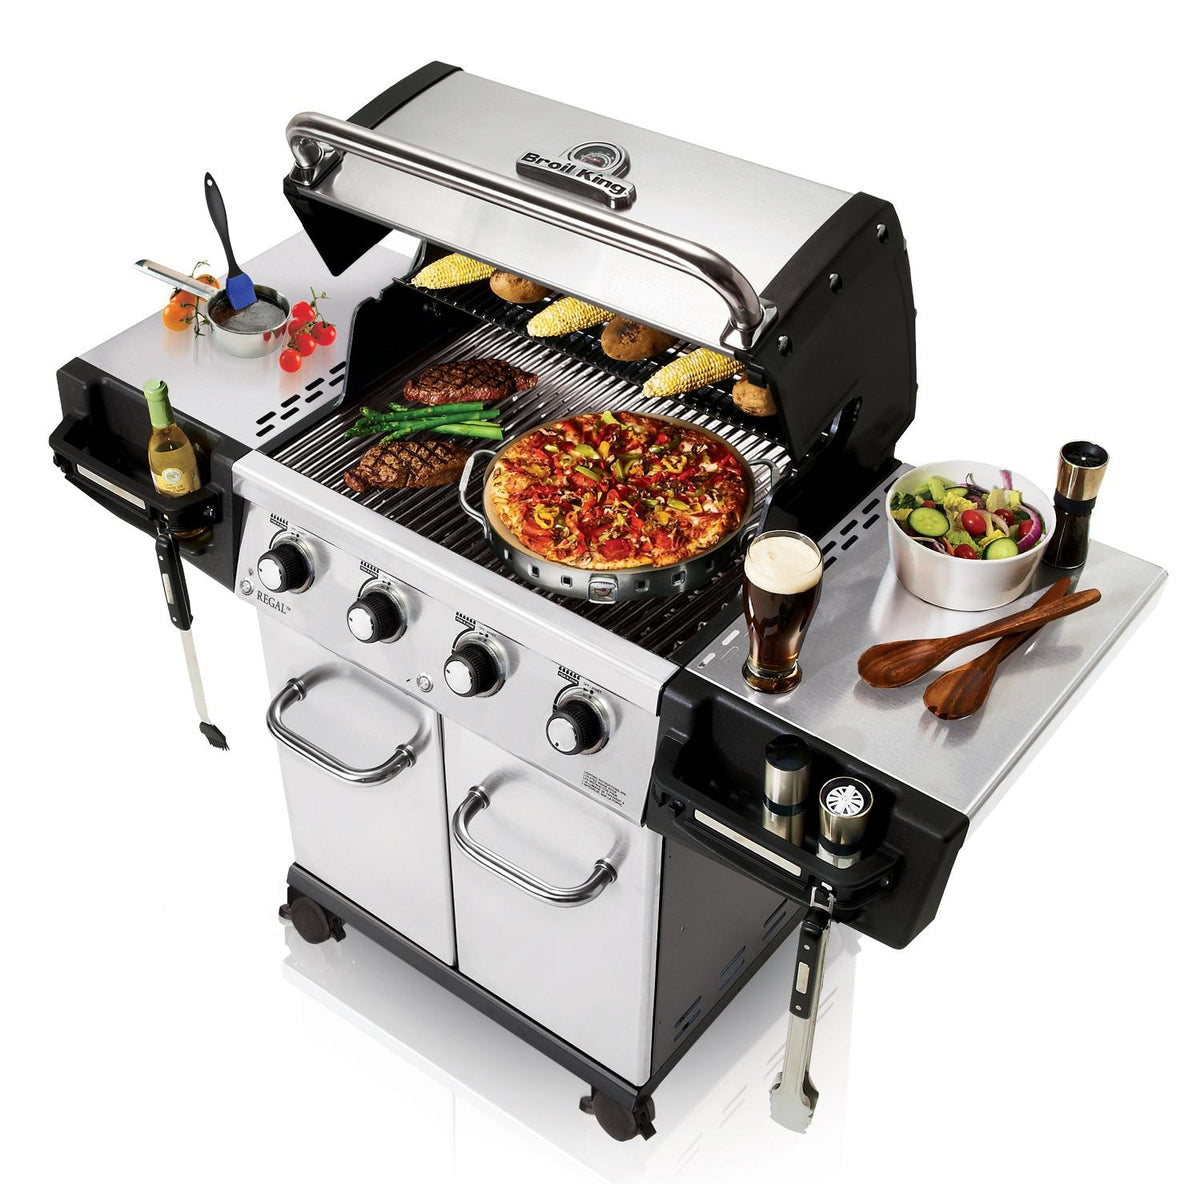 Broil King Regal S420 Pro 4-Burner Freestanding Gas Grill - Angled View With Food